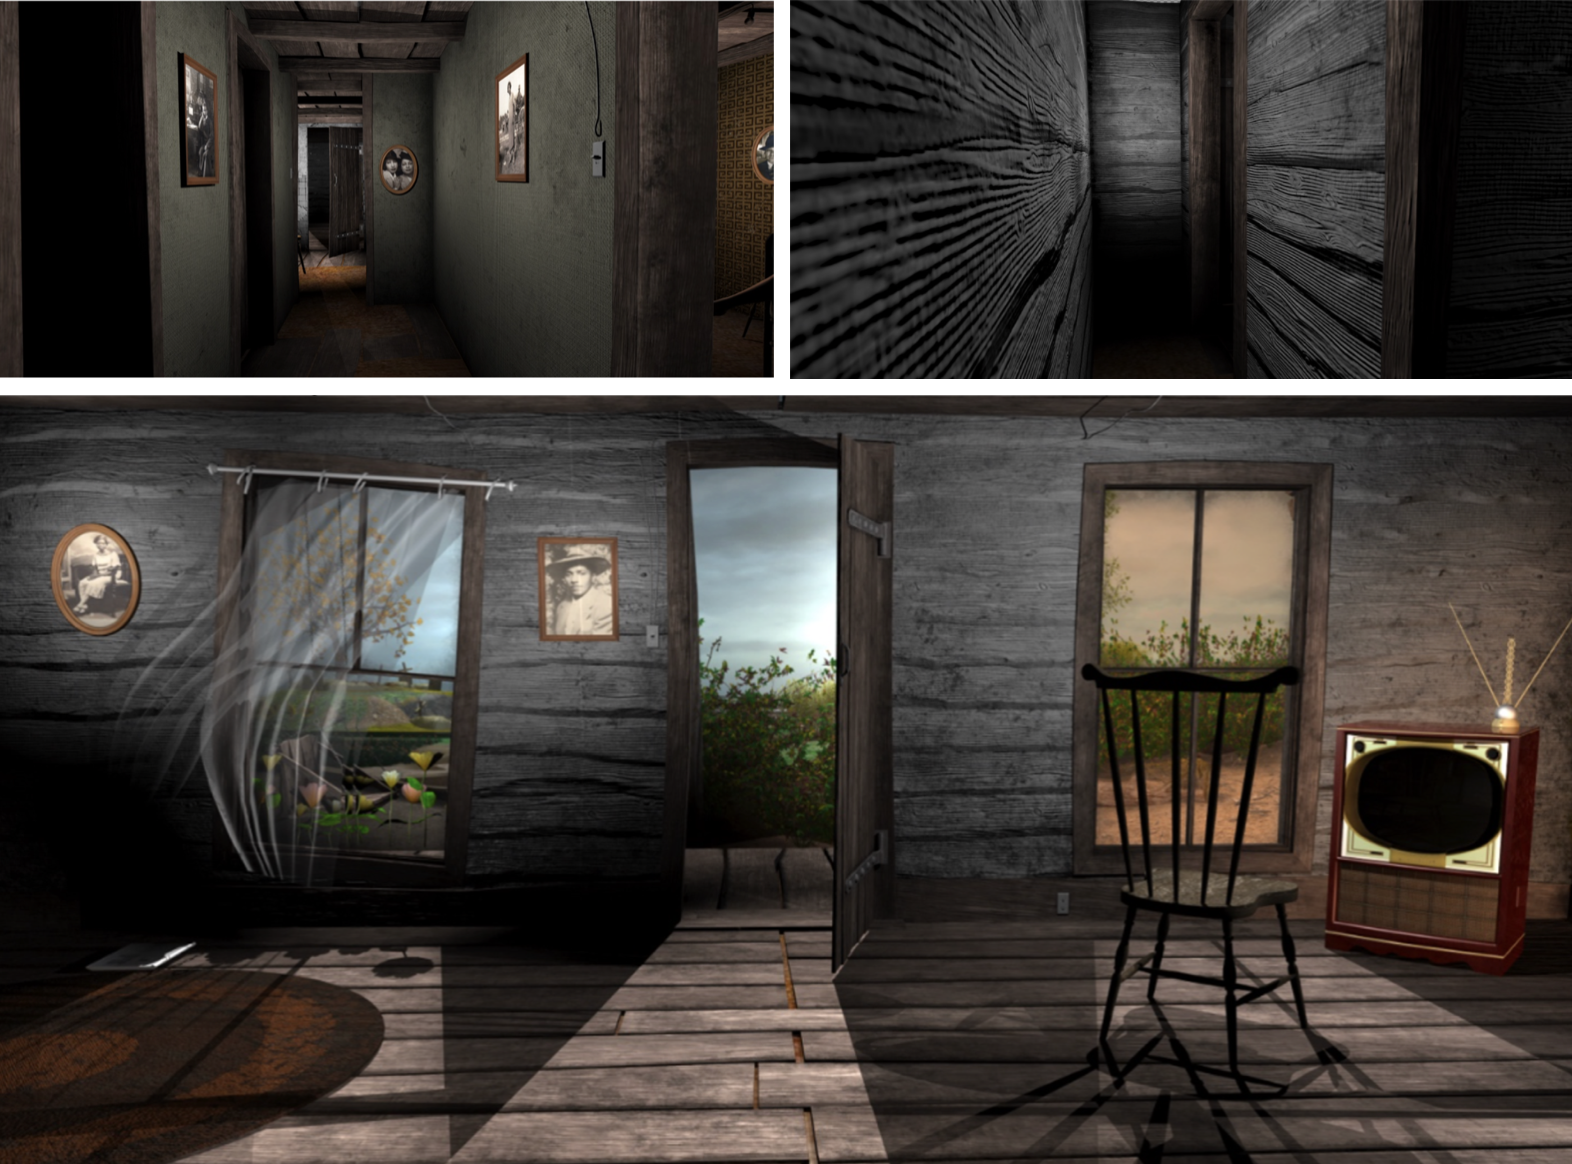 Three screen shots of 3D modeling of a cabin room with windows and an open door looking out on a rural setting and cabin corridors.